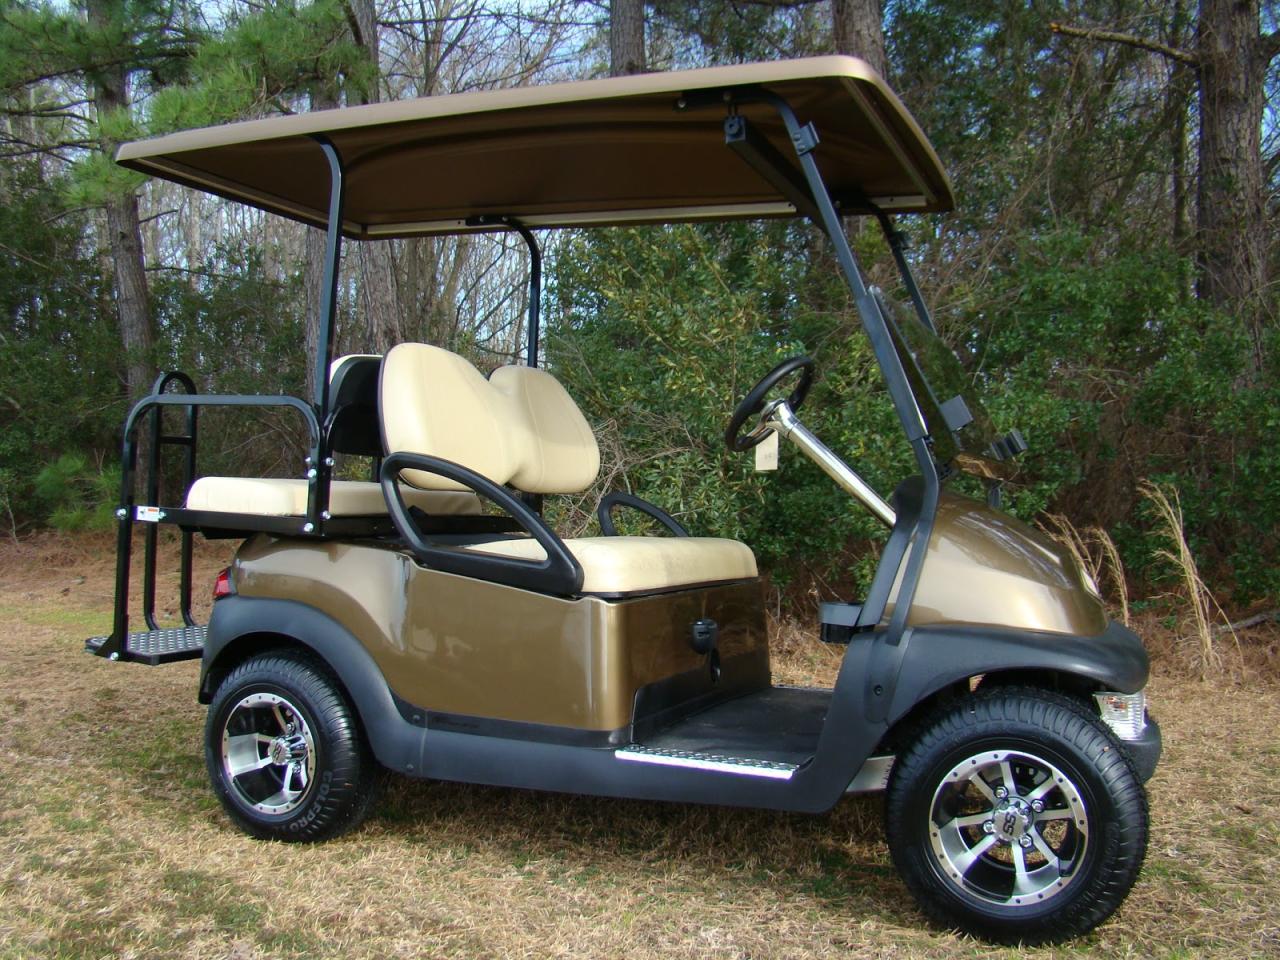 Used Golf Carts for Sale by Owner in Clay, Arkansas: Your Guide to Finding the Perfect Ride